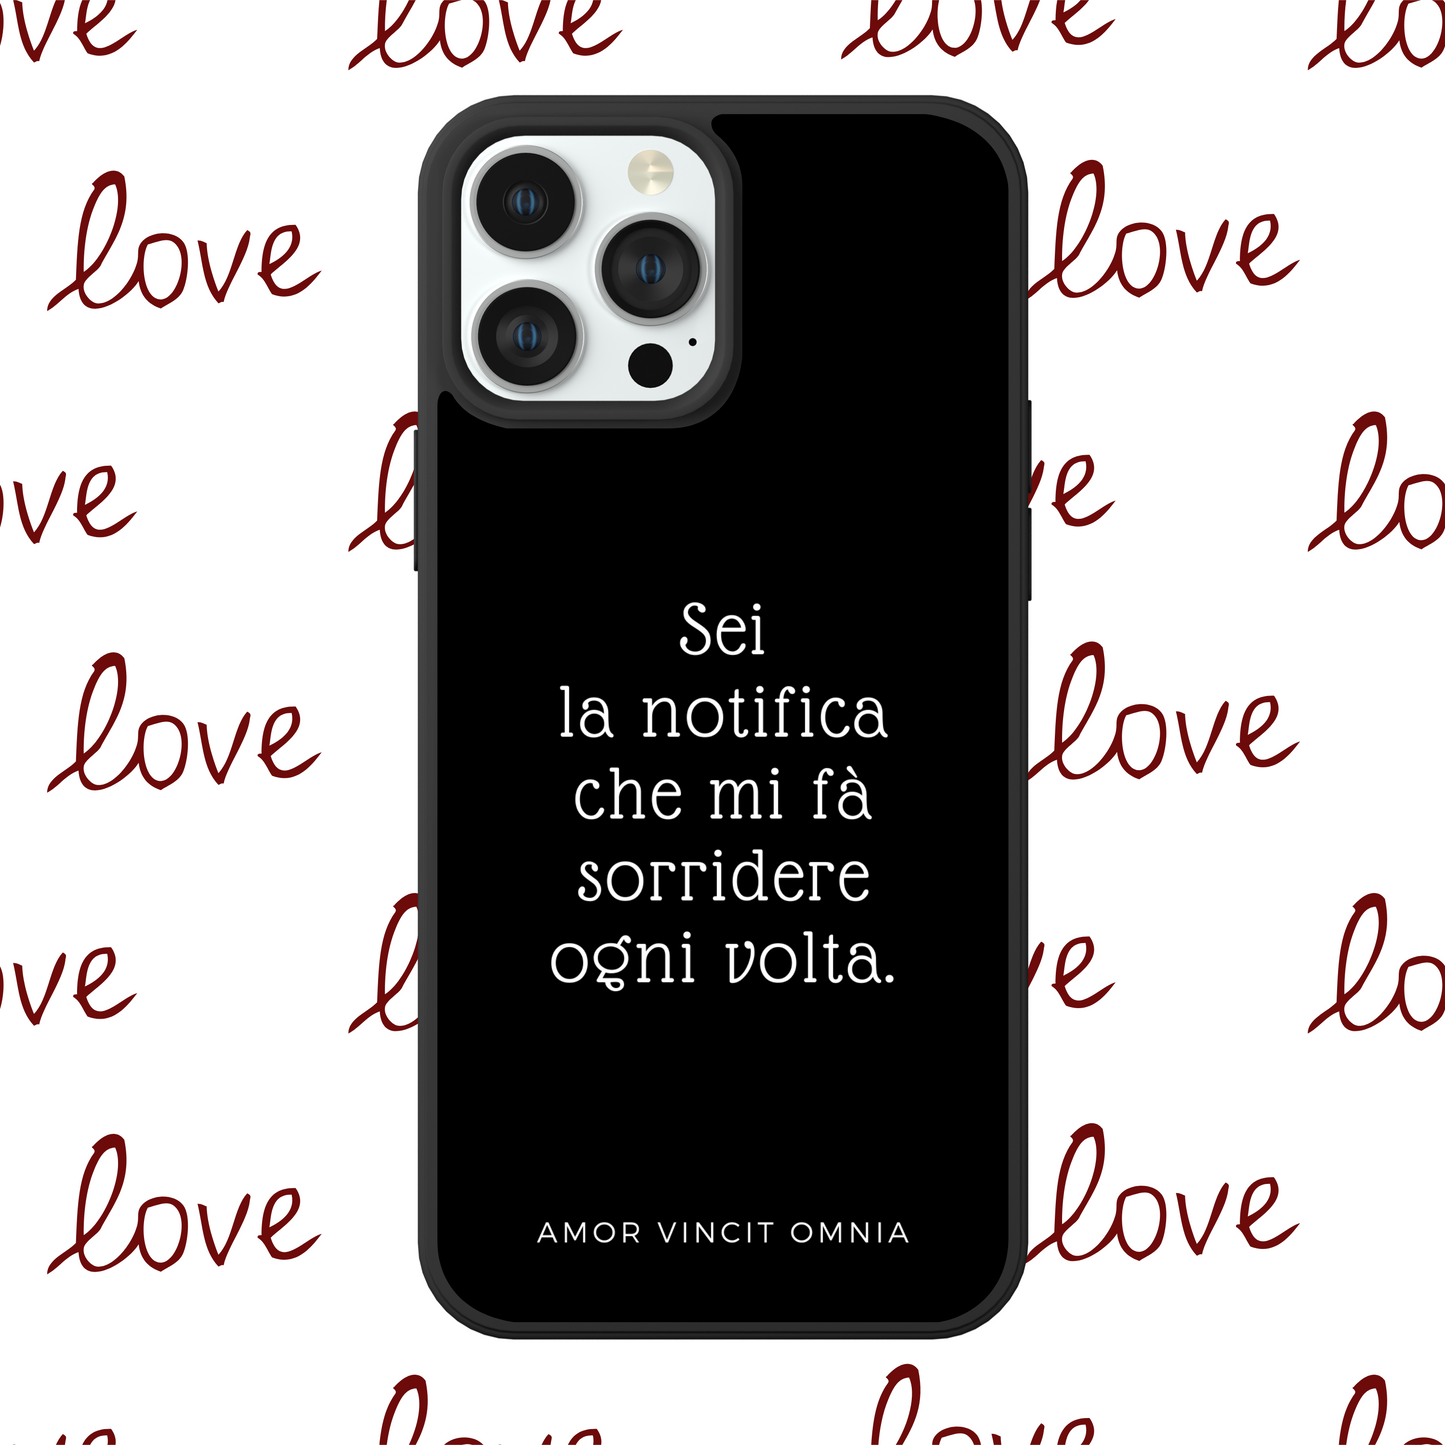 5. COVER LOVE IS